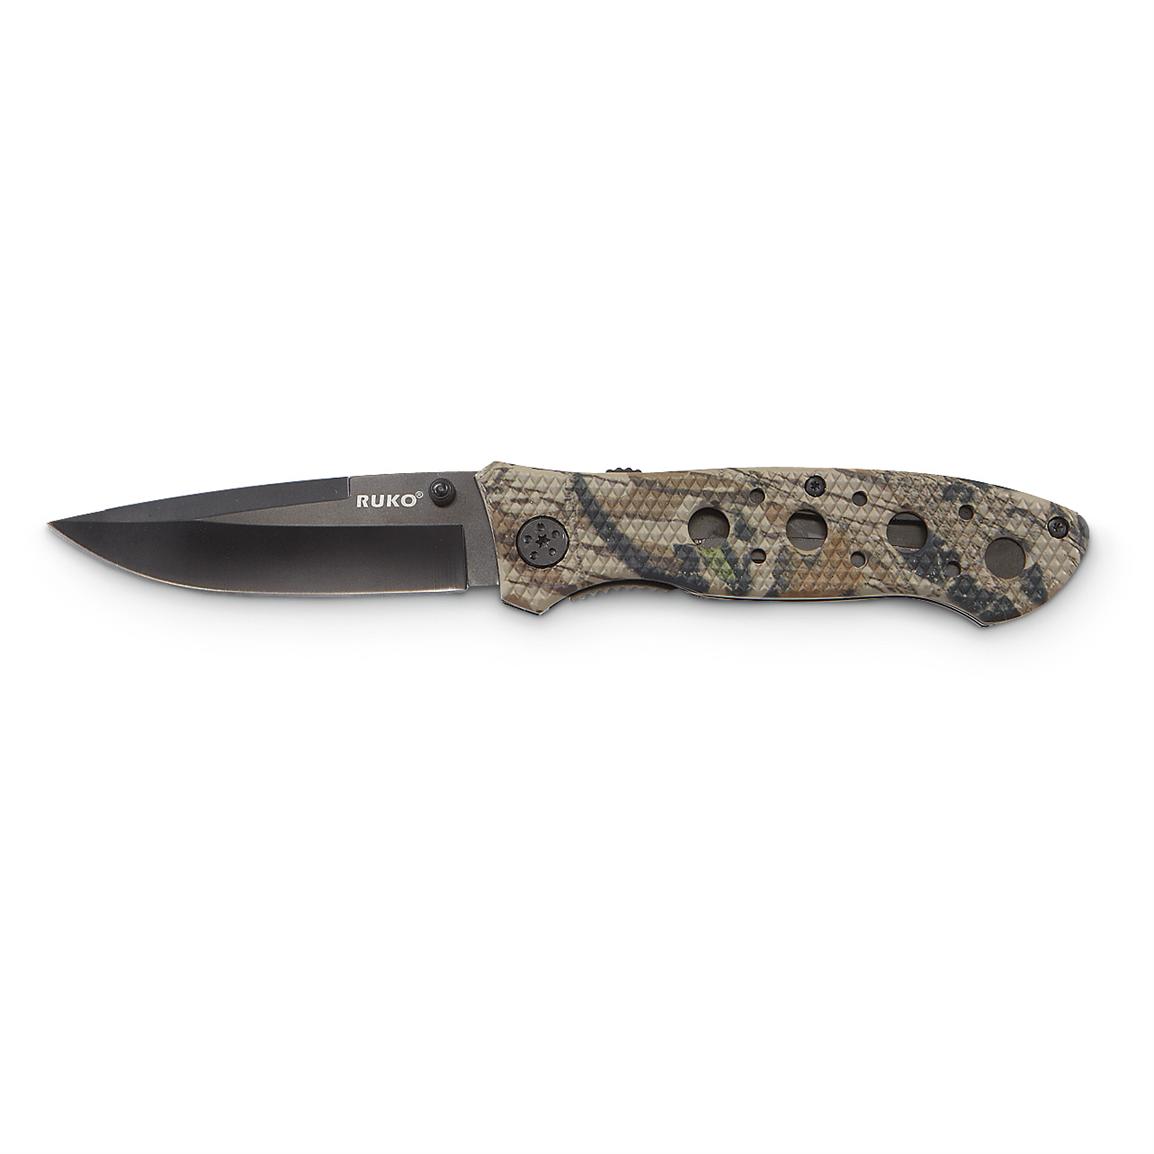 RUKO® Hammerhead Folding Knife - 208945, Spring Assisted Knives at